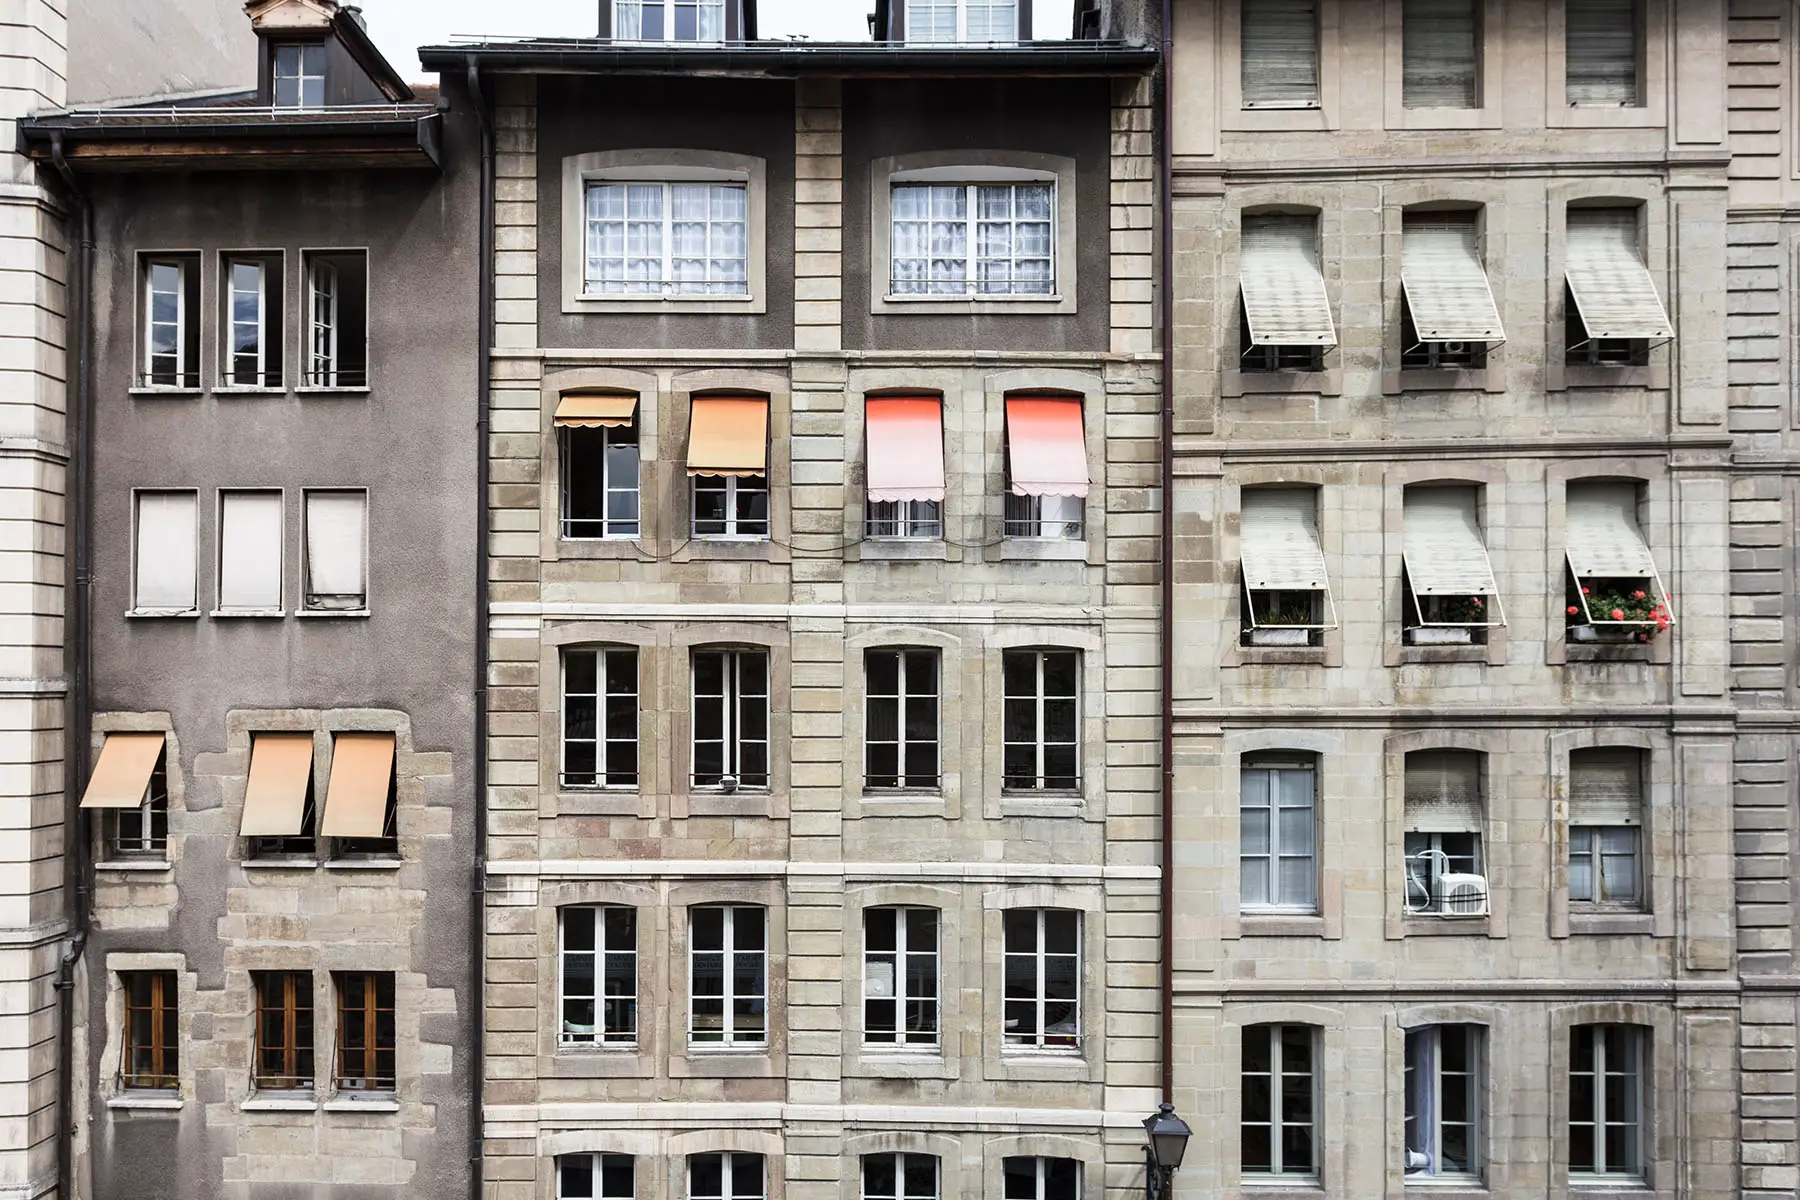 The facade of an old residential building in Geneva, Switzerland.